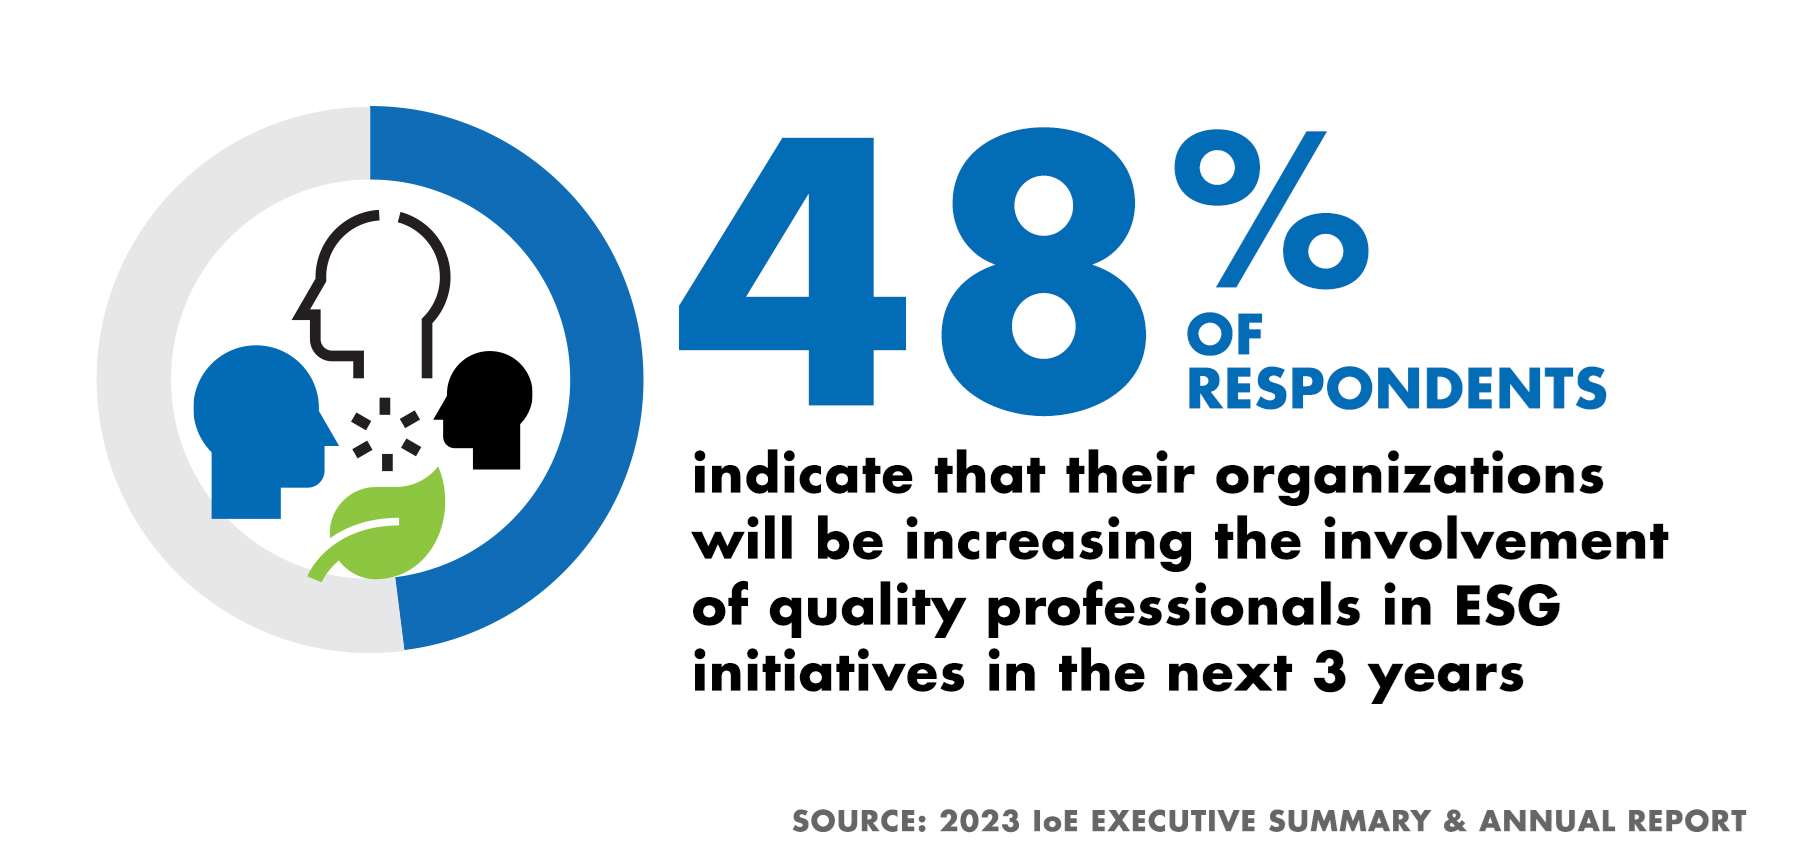 A graphic with text that reads "44% of respondents indicate that their organizations will be inceasing the involvement of quality professionals in ESG initiatives in the next 3 years"